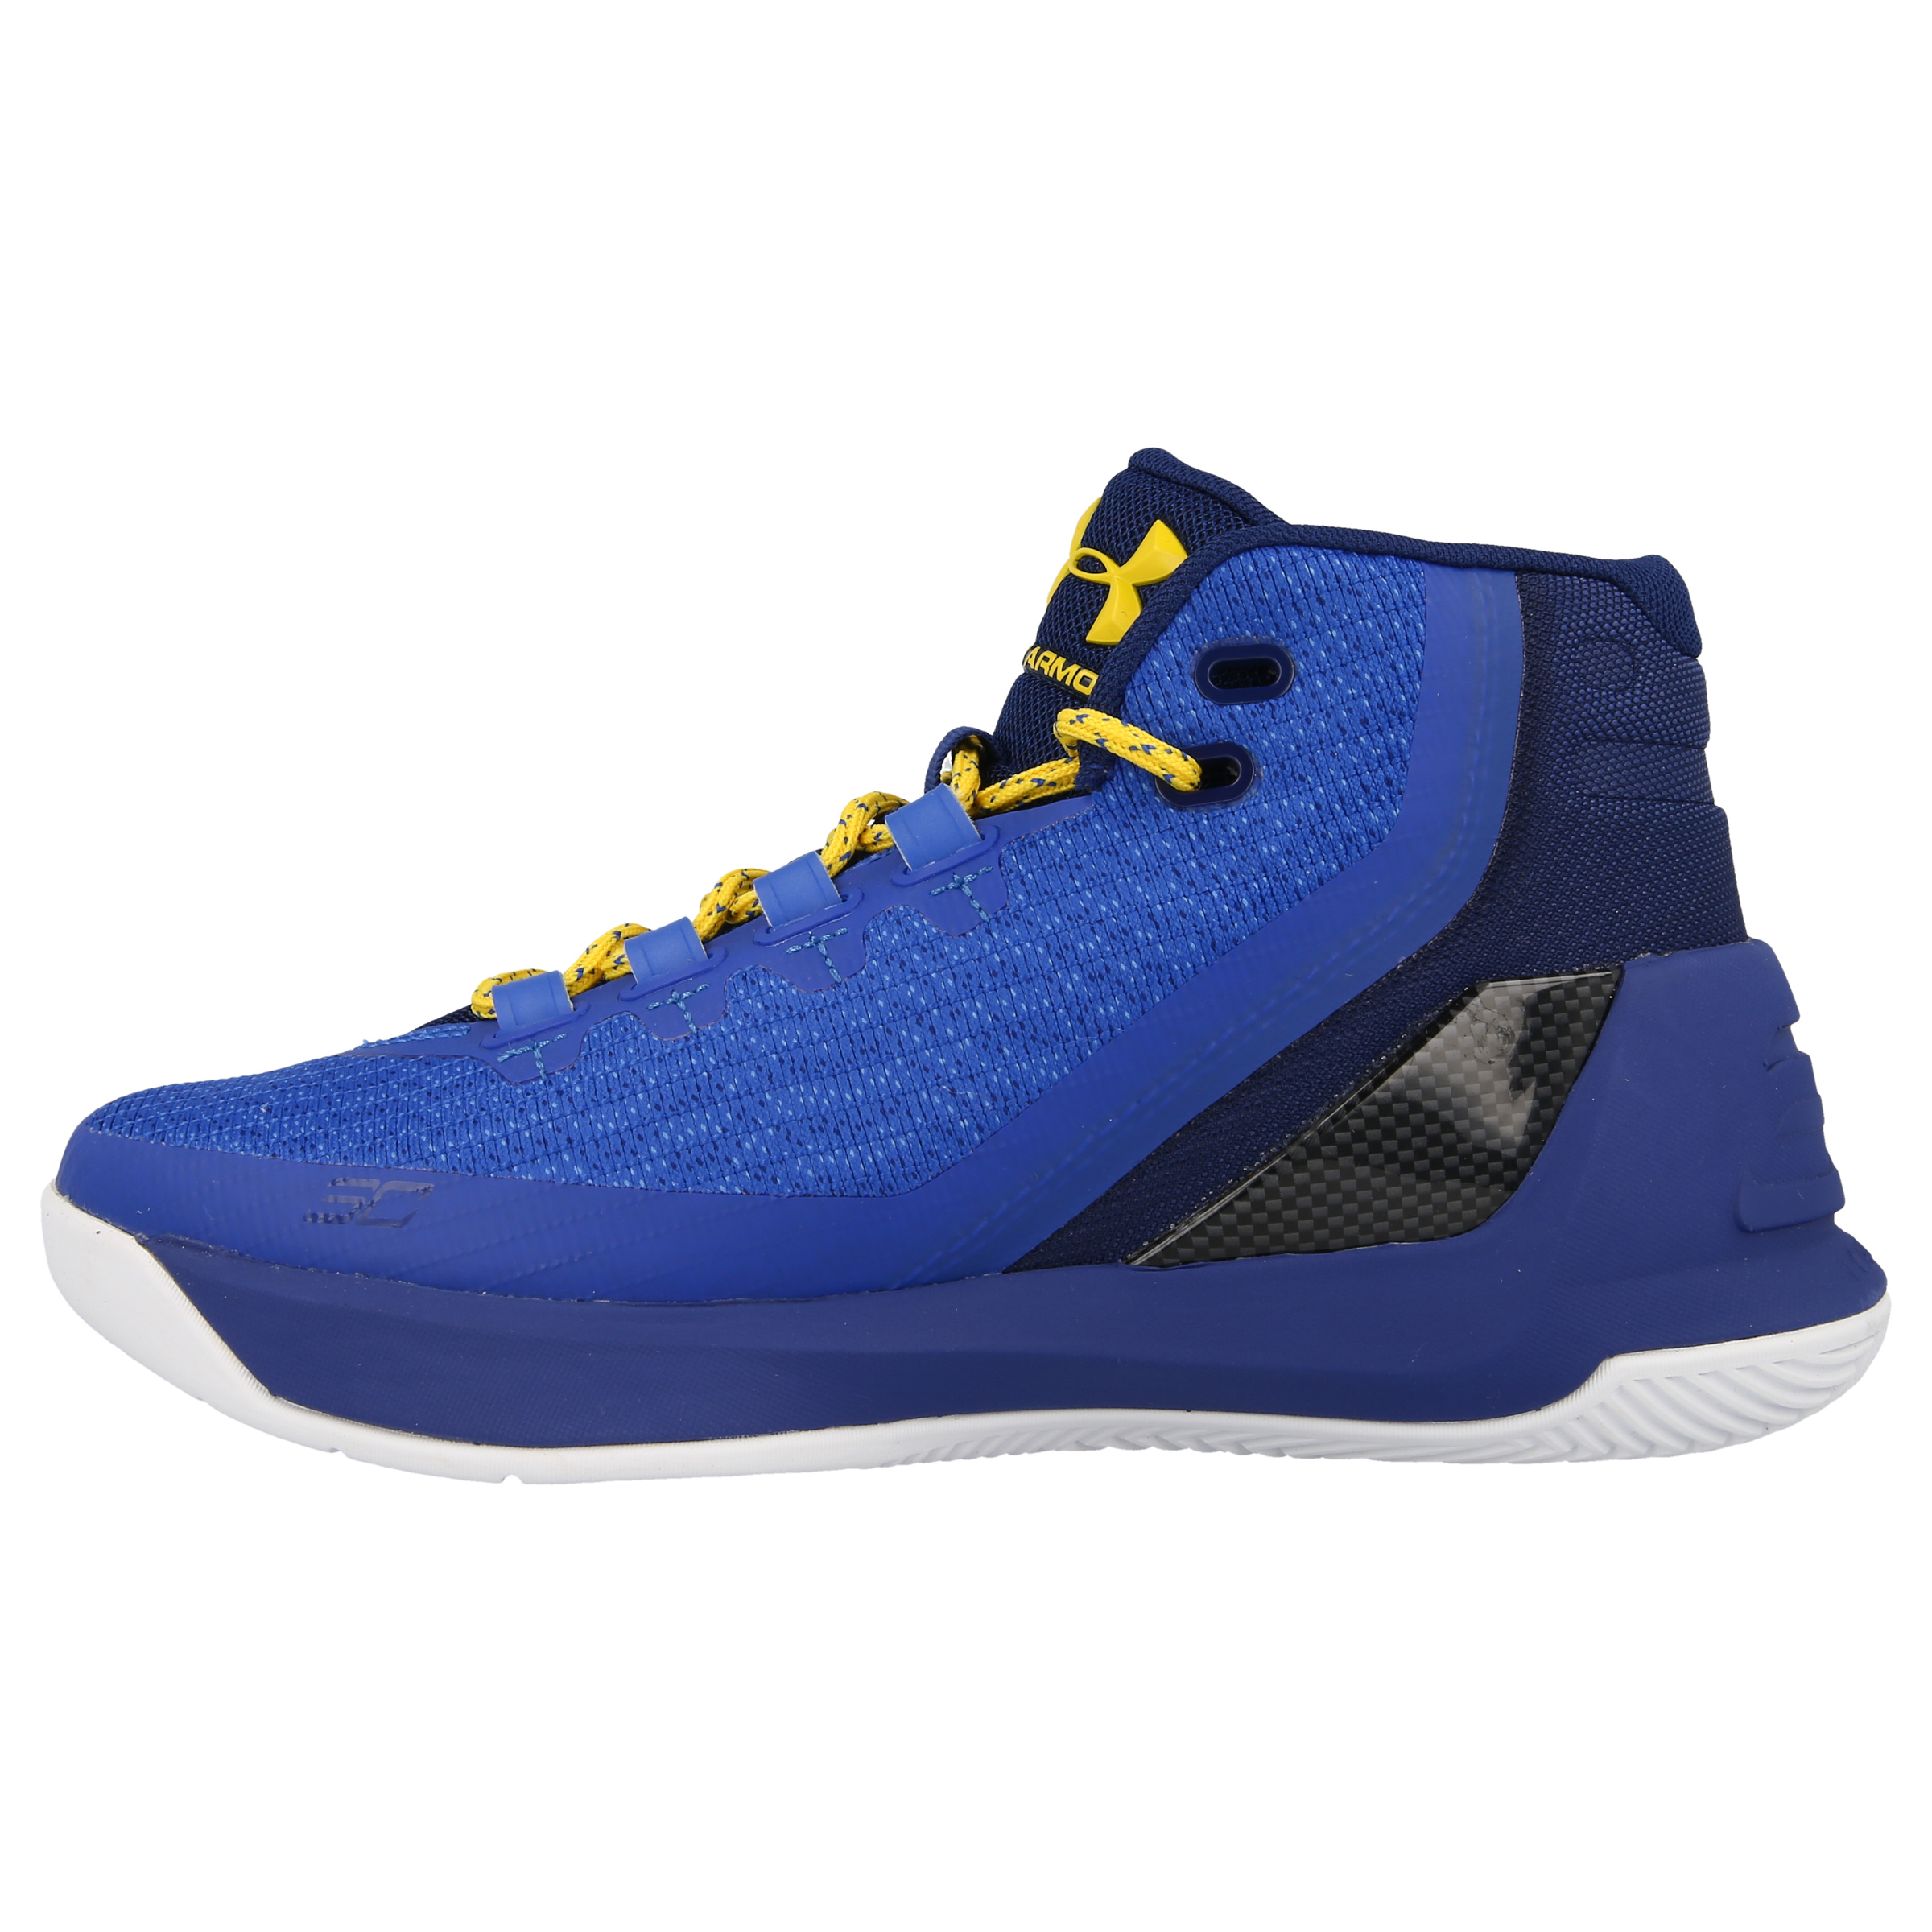 Under Armour UA GS CURRY 3-TRY 